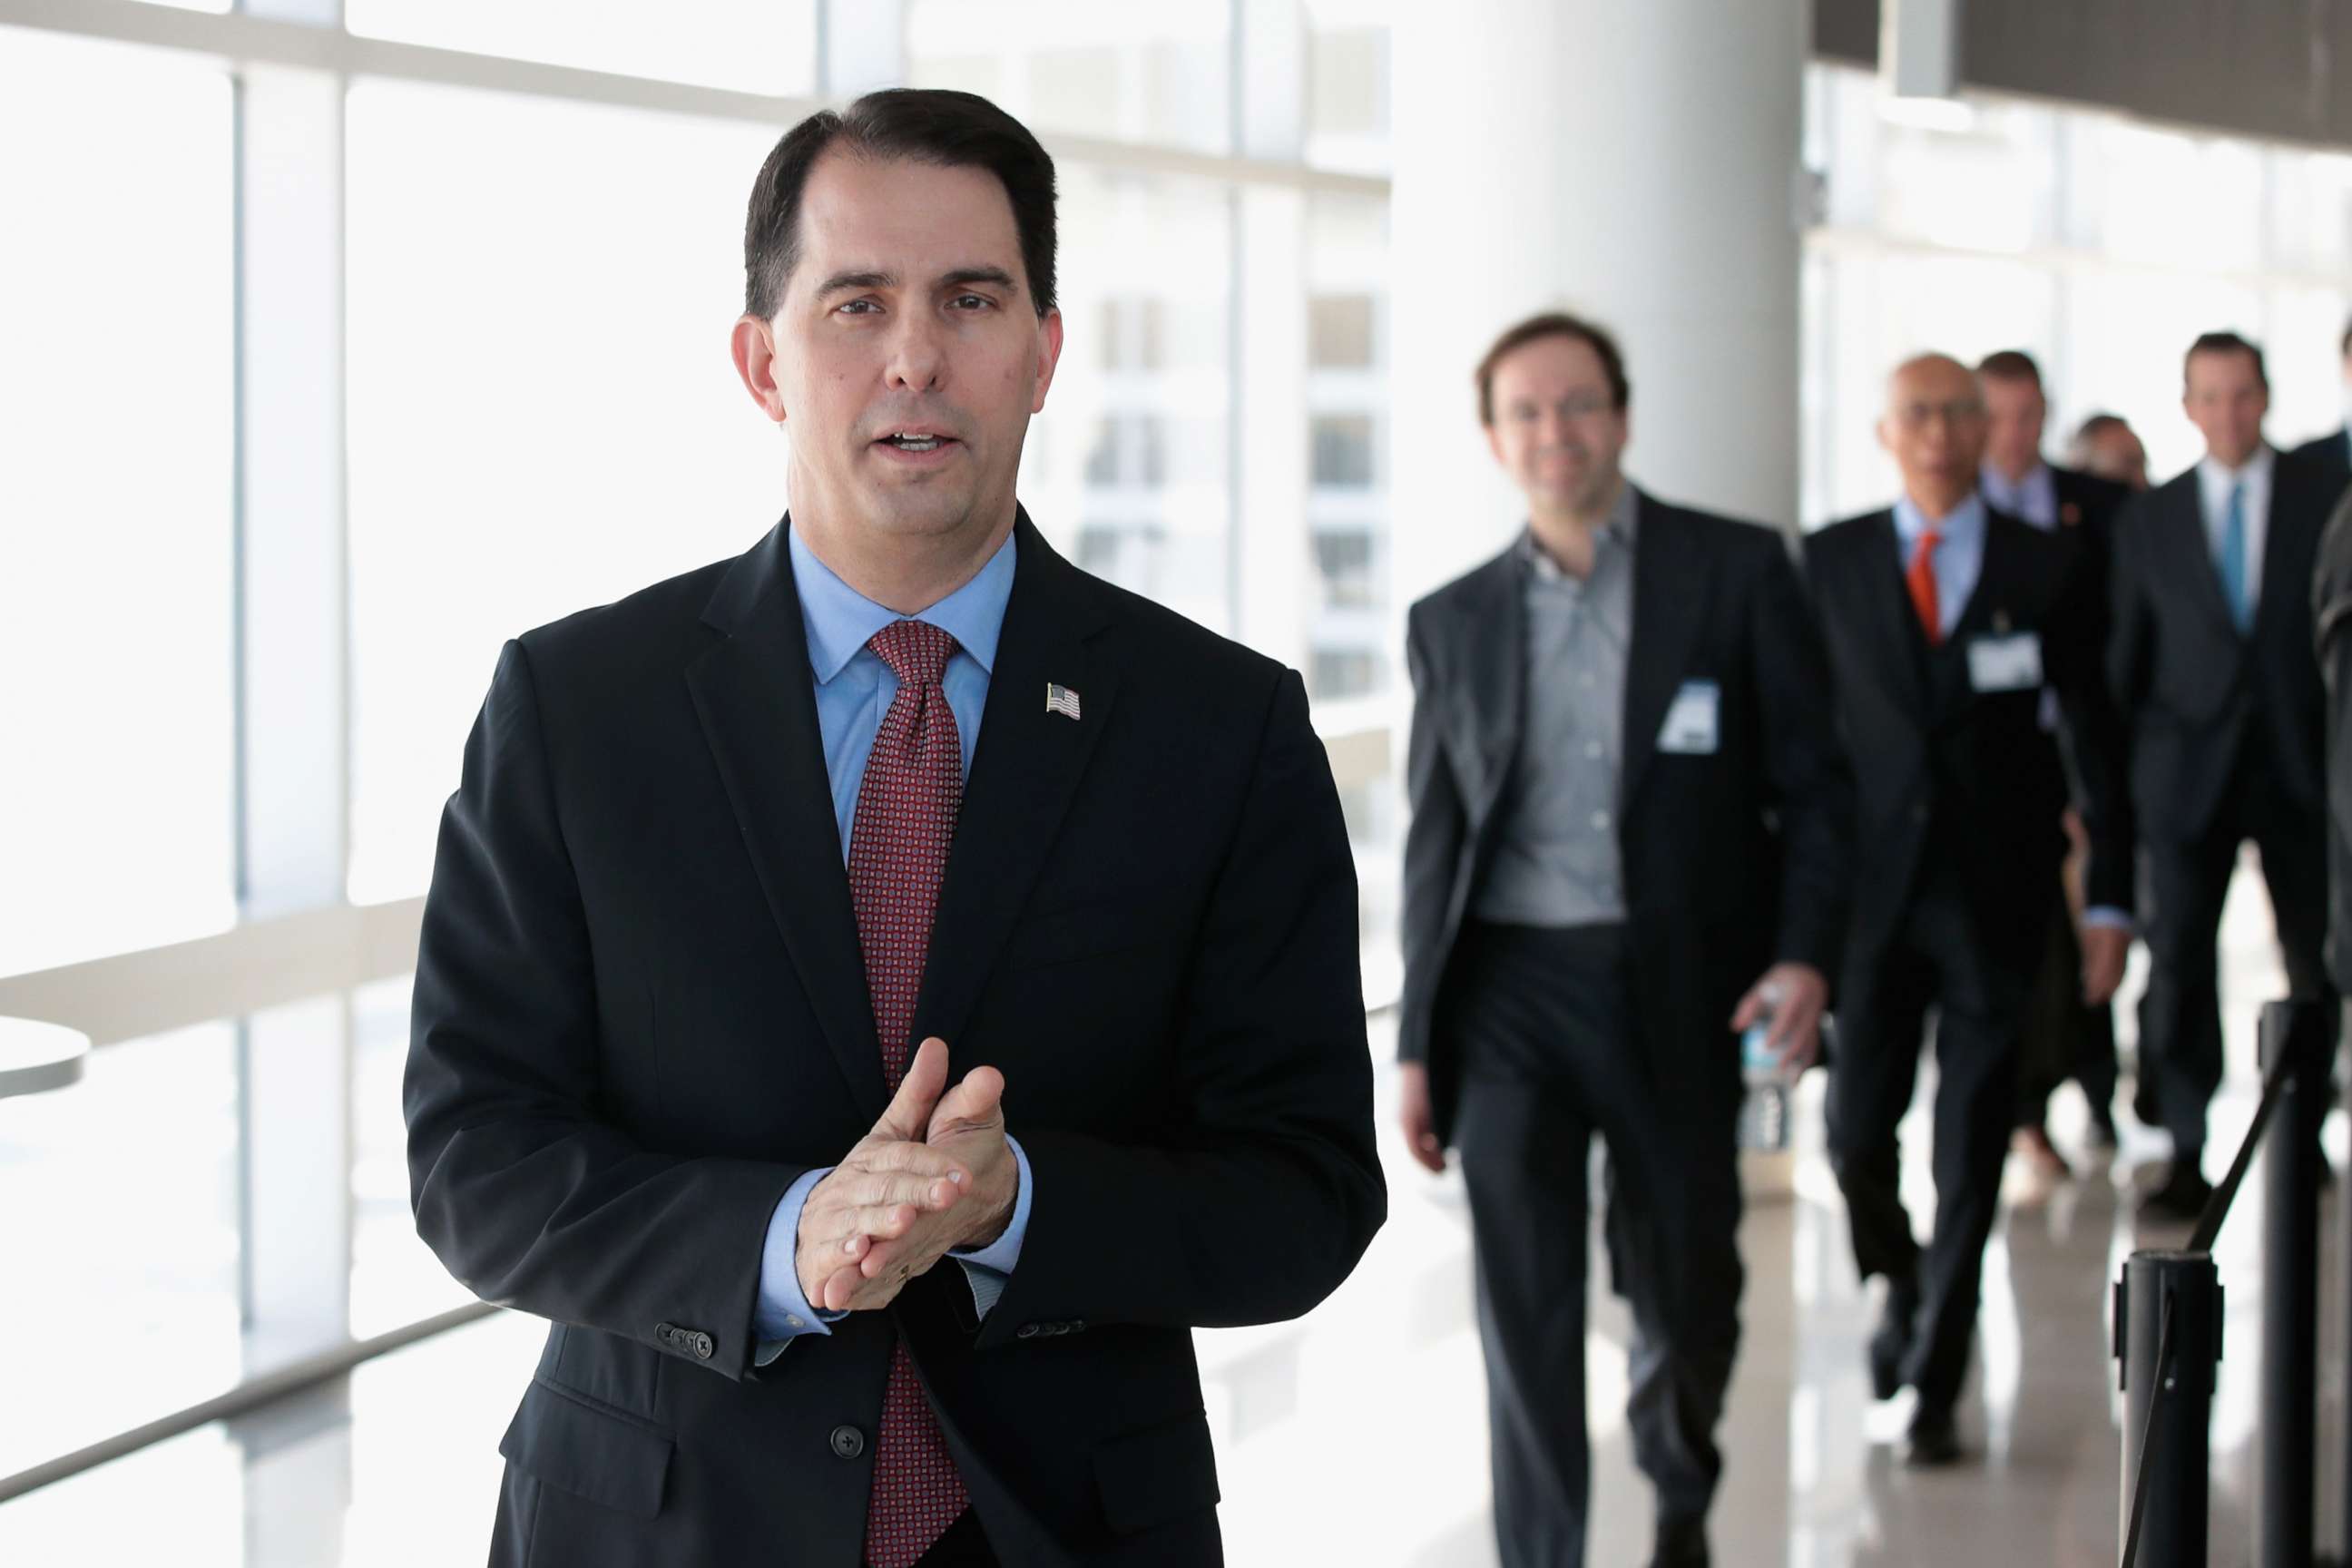 PHOTO: Wisconsin Governor Scott Walker arrives at an event in Milwaukee, Feb. 6, 2018.